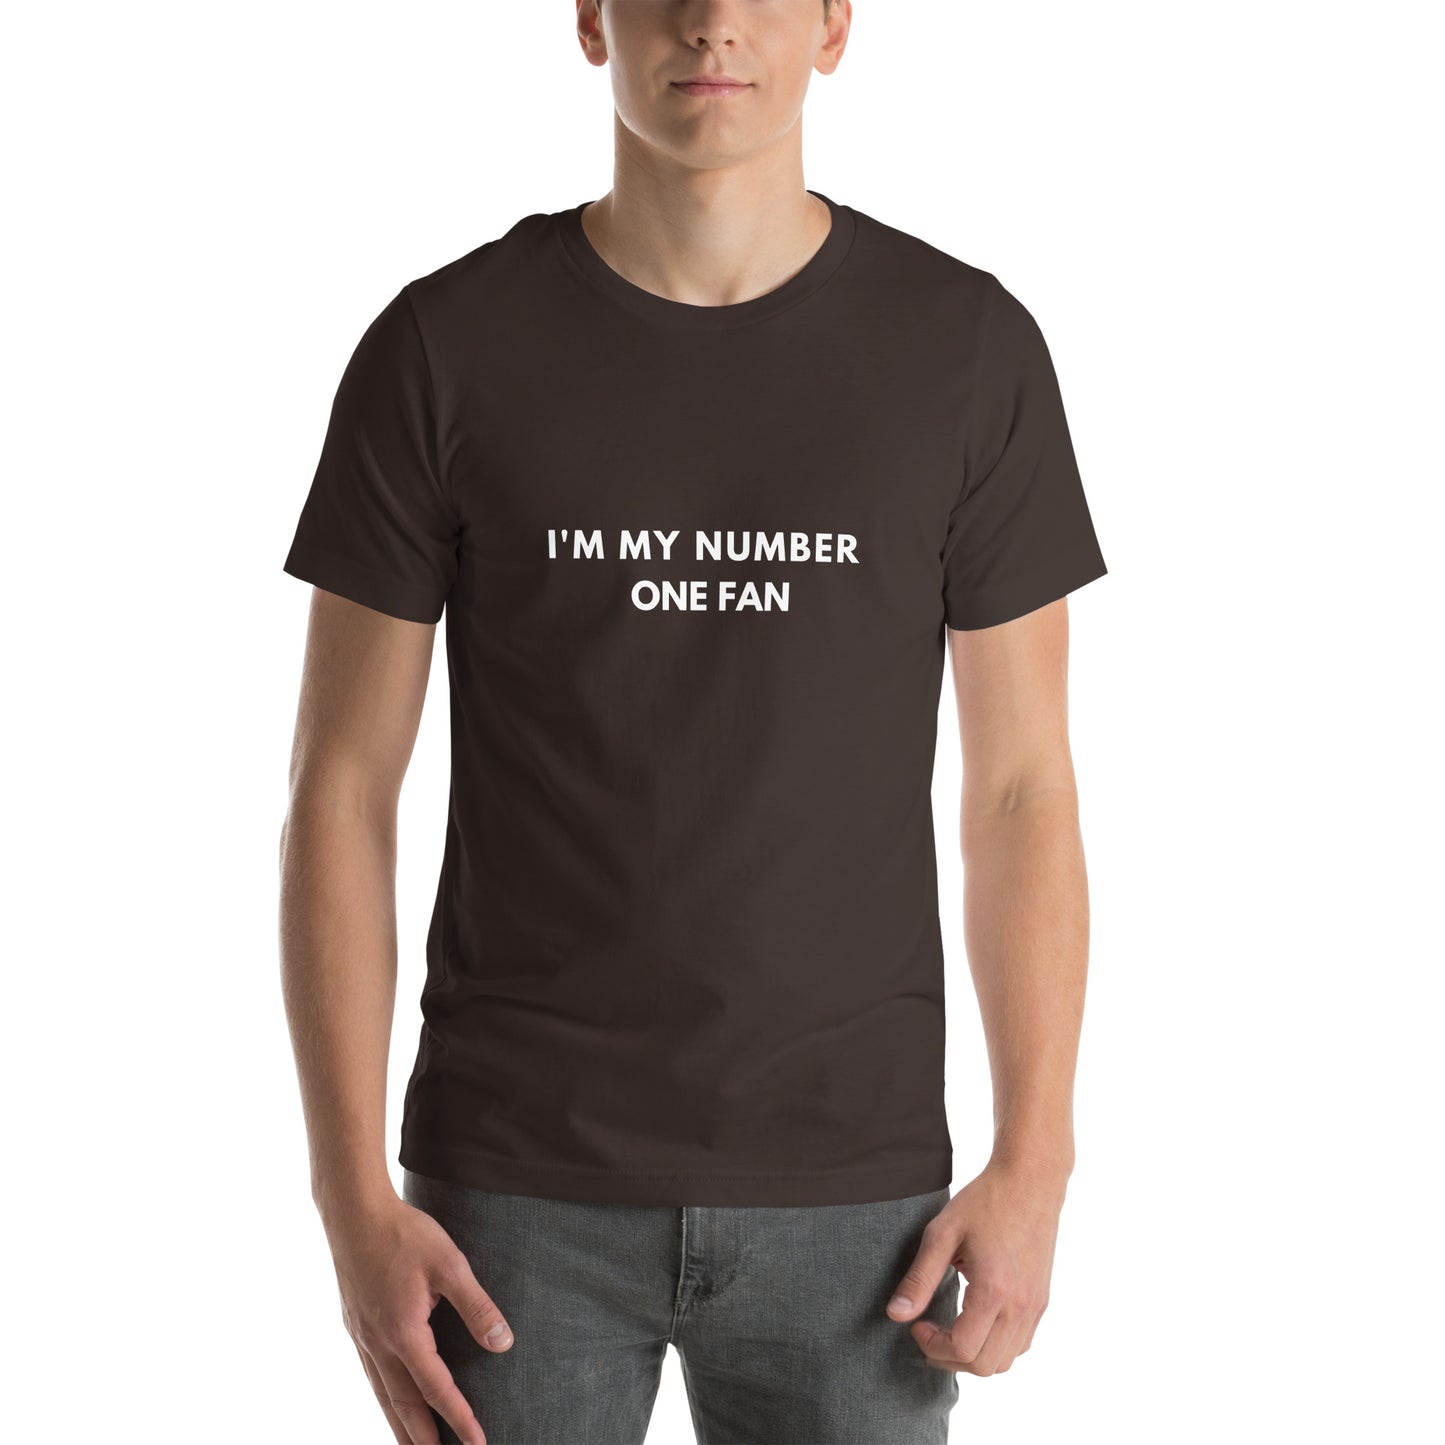 I'm my number one fan Unisex t-shirt